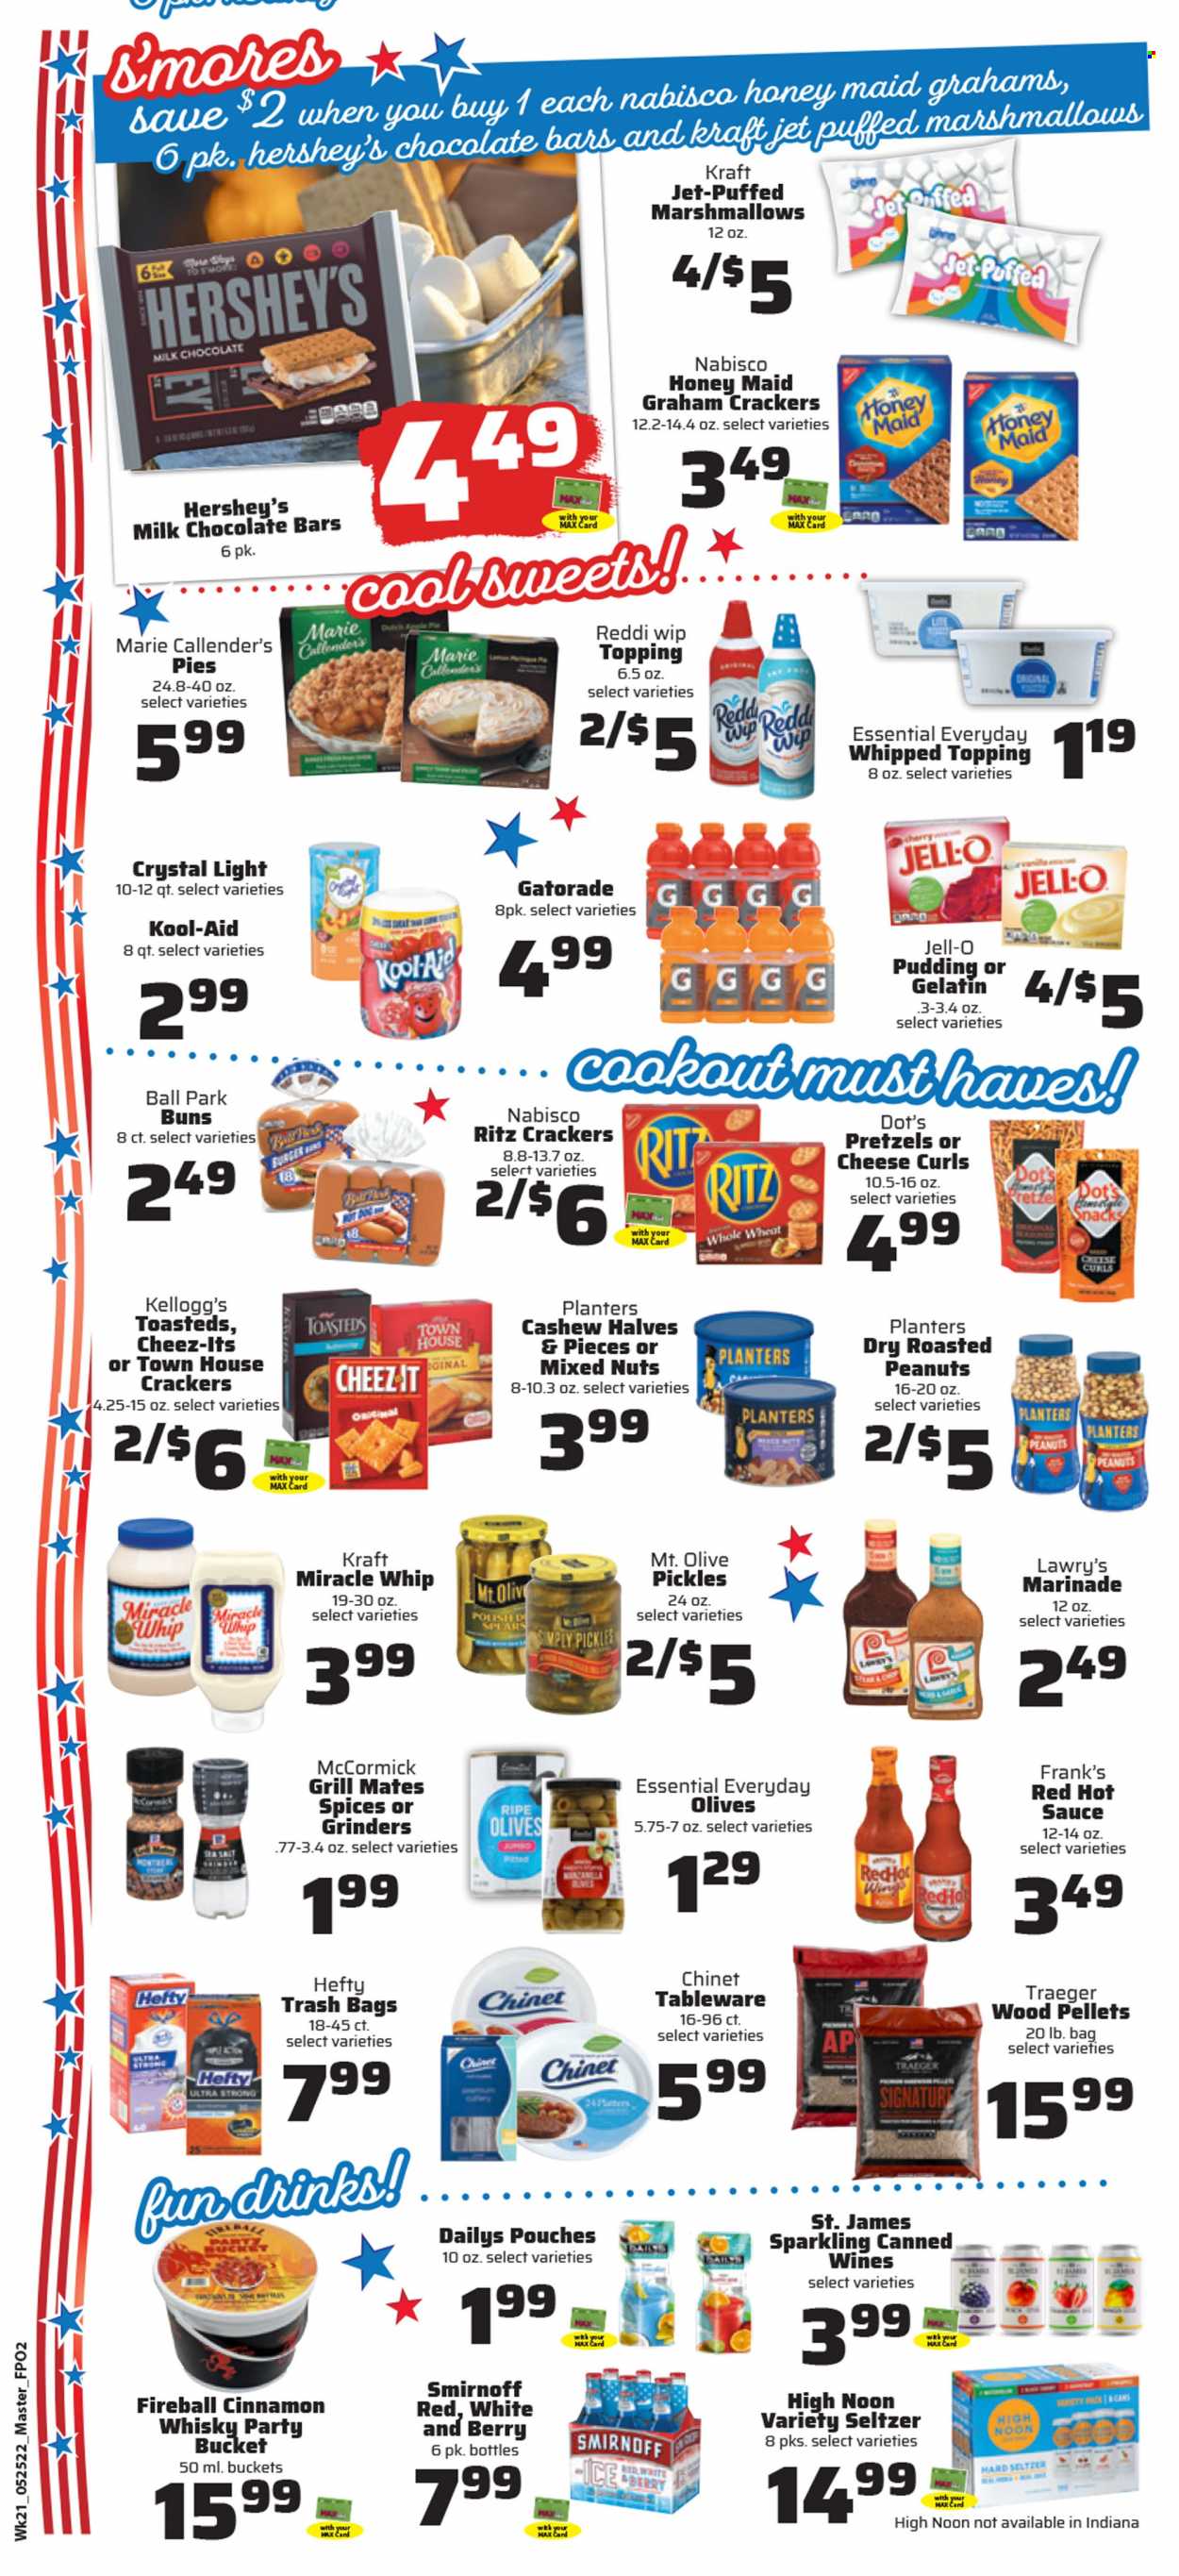 thumbnail - County Market Flyer - 05/25/2022 - 05/31/2022 - Sales products - pretzels, buns, sauce, Marie Callender's, Kraft®, pudding, Miracle Whip, Hershey's, graham crackers, marshmallows, milk chocolate, crackers, Kellogg's, RITZ, chocolate bar, topping, Jell-O, pickles, olives, Honey Maid, hot sauce, marinade, roasted peanuts, peanuts, mixed nuts, Planters, Gatorade, Smirnoff, Hard Seltzer, cinnamon whisky, whisky. Page 2.